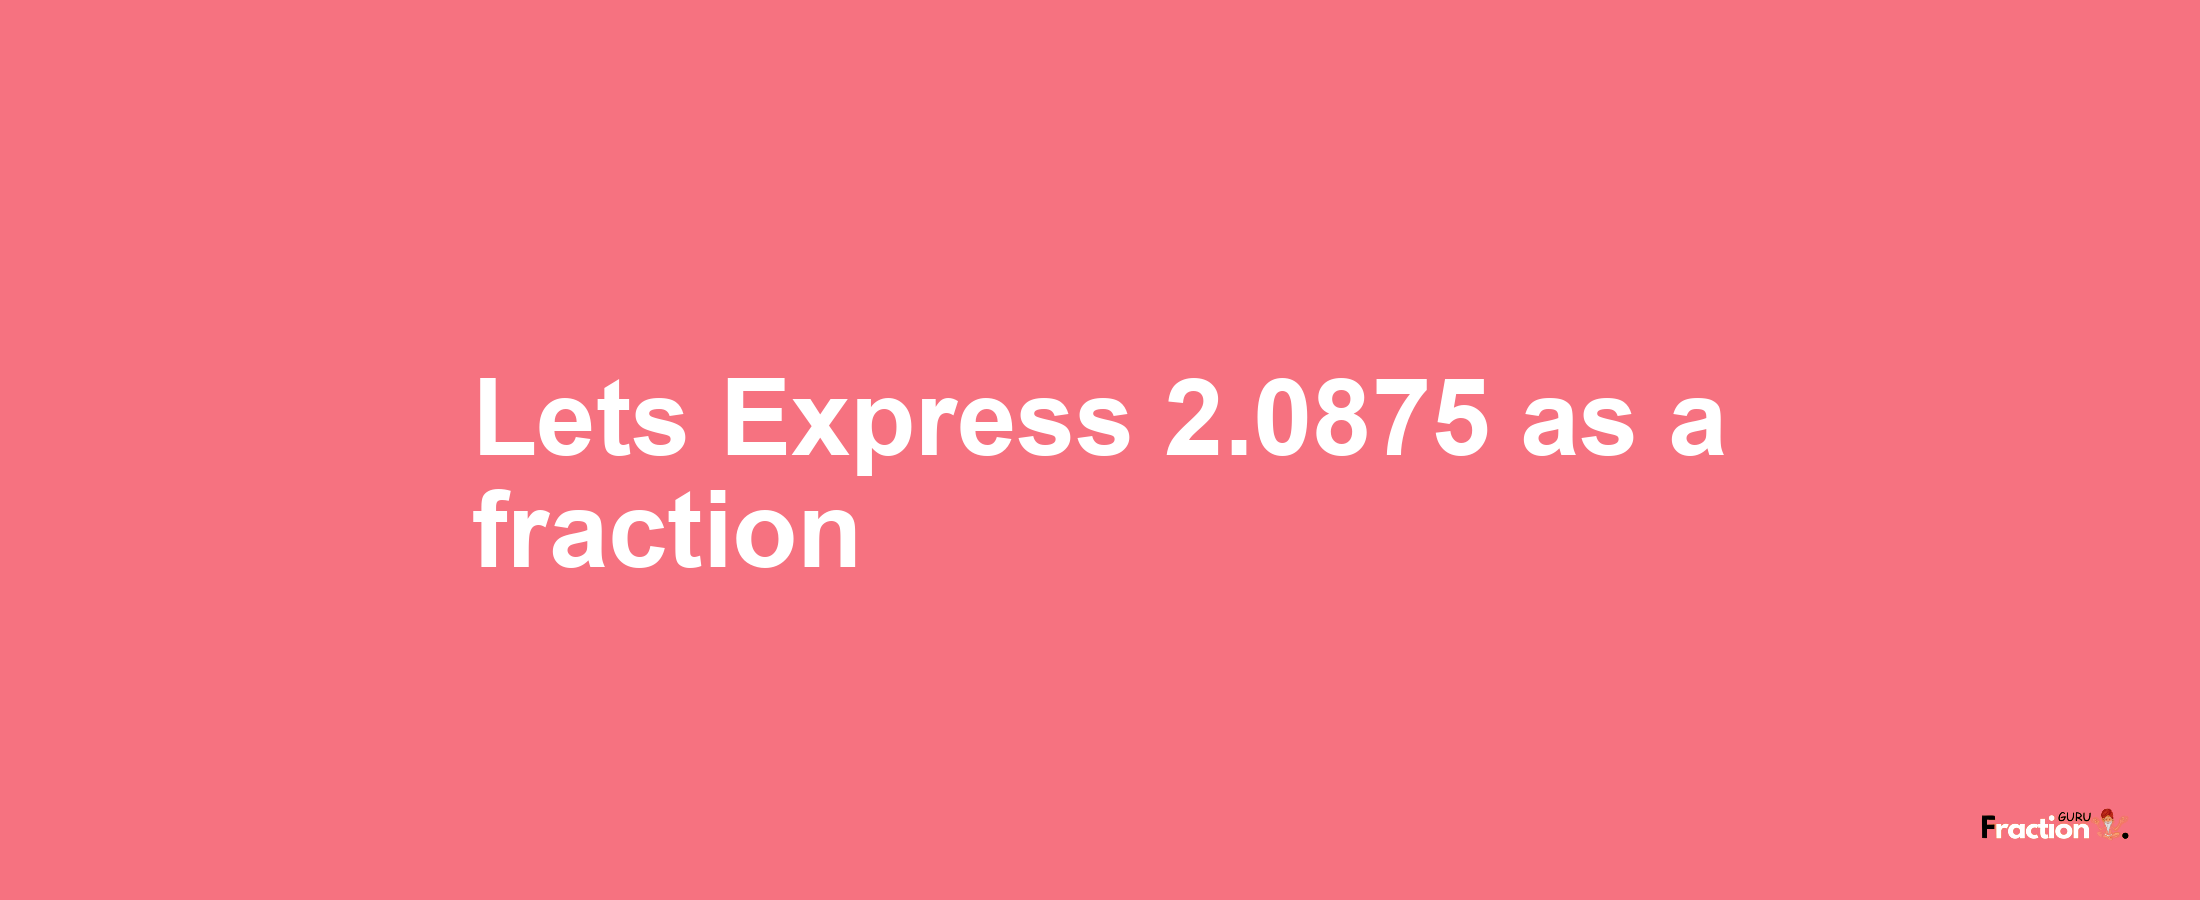 Lets Express 2.0875 as afraction